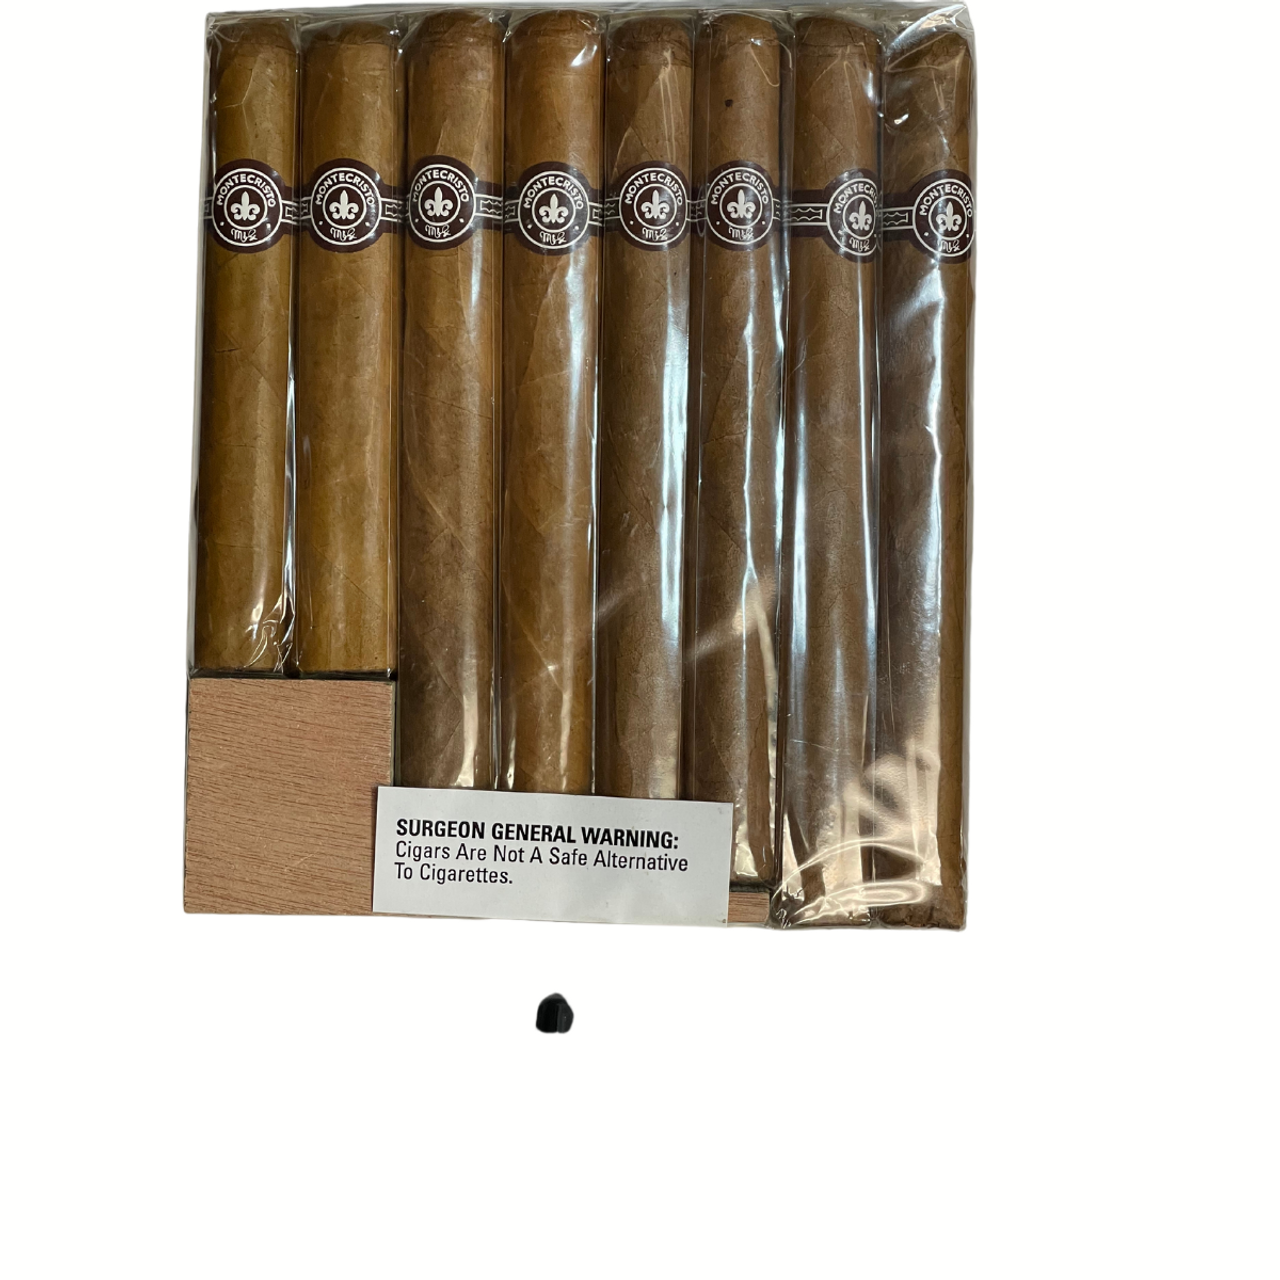 8 amazing Montecristo cigars at a better price!